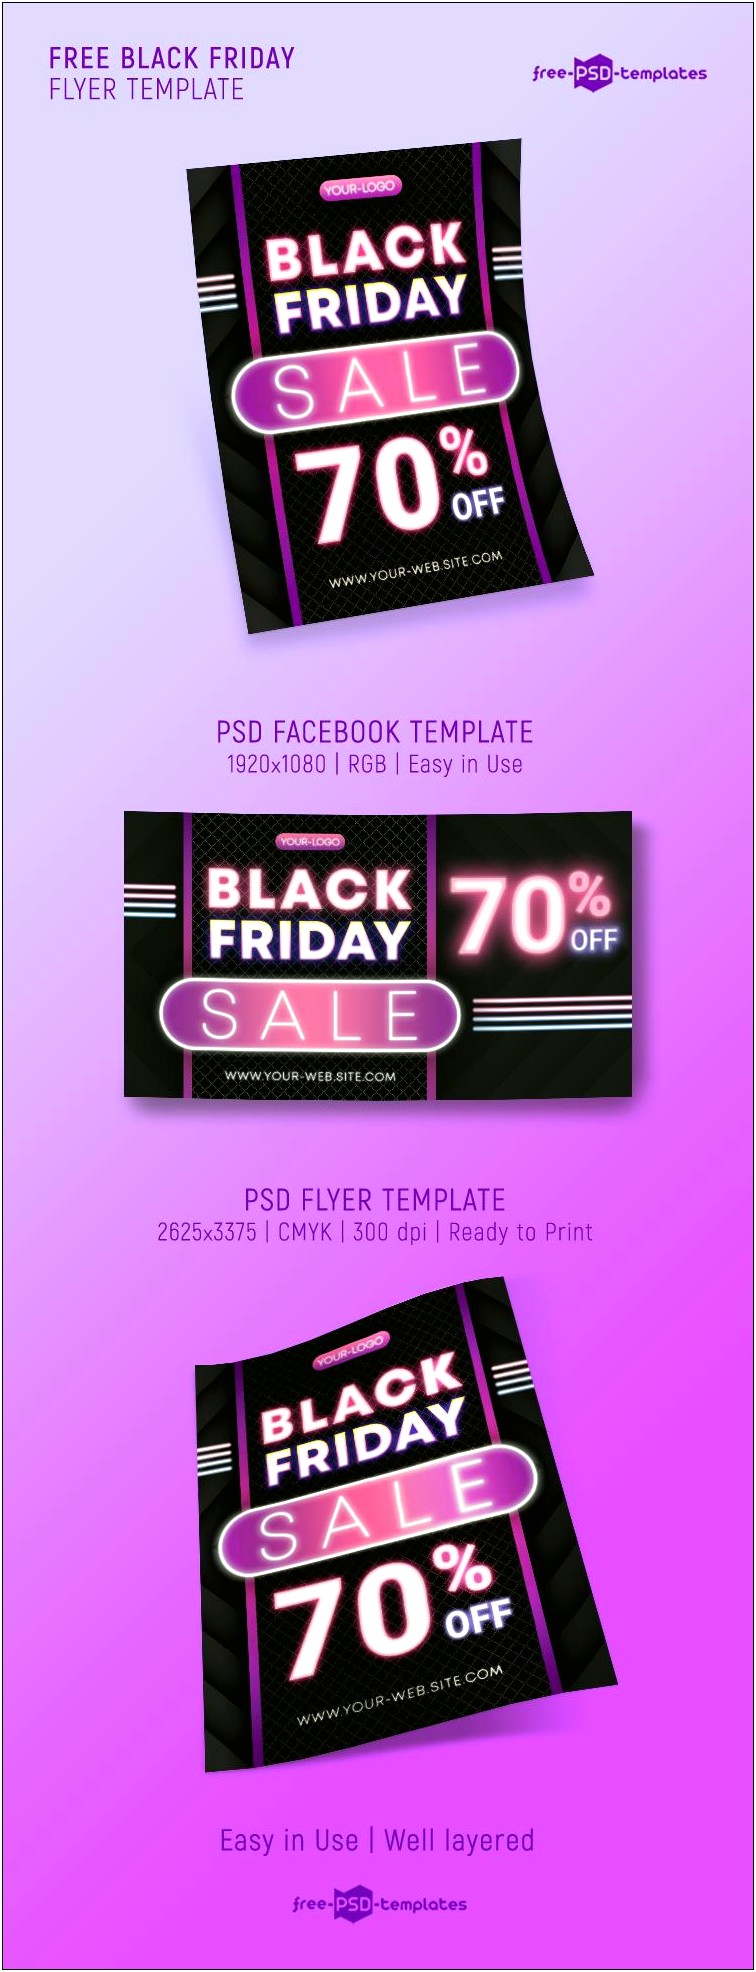 Free Black Friday Photography Templates For Flyers